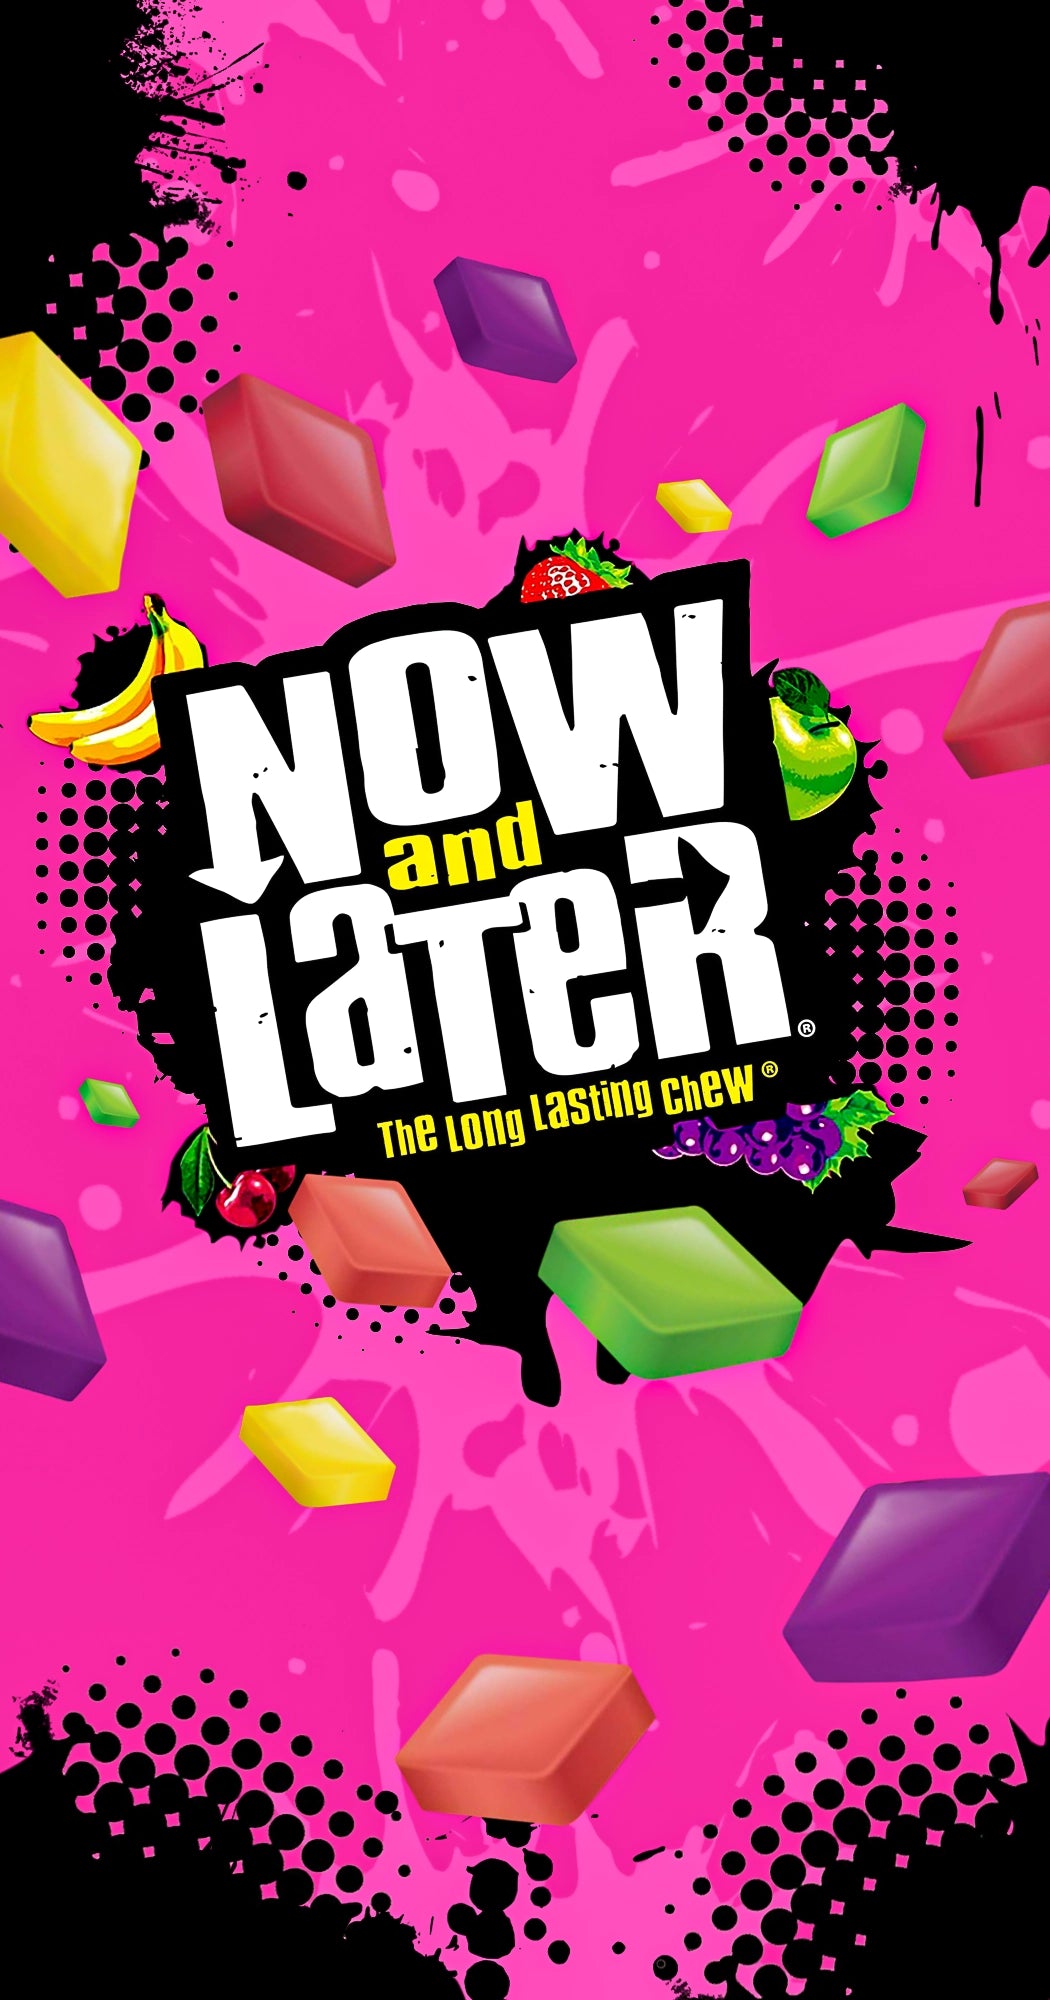 Now and later in collection banner